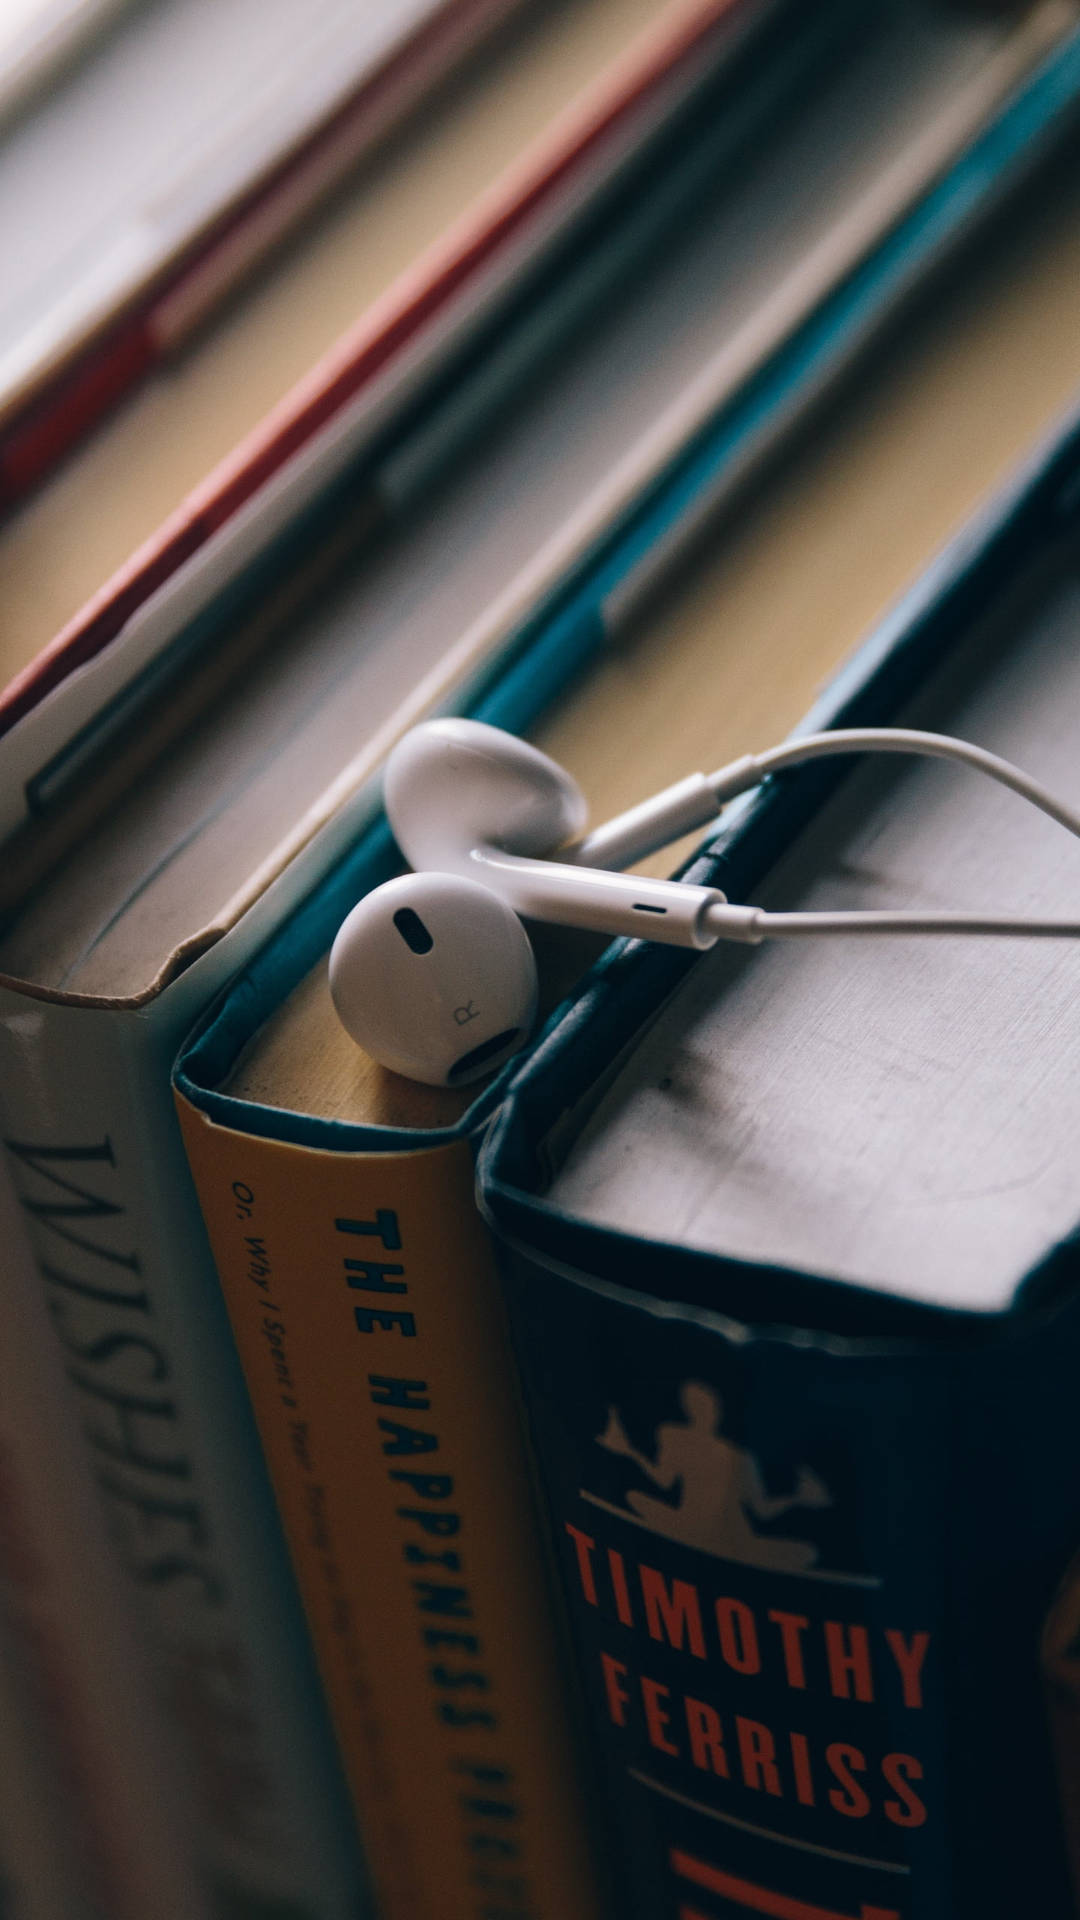 Earphones Placed Over The Books